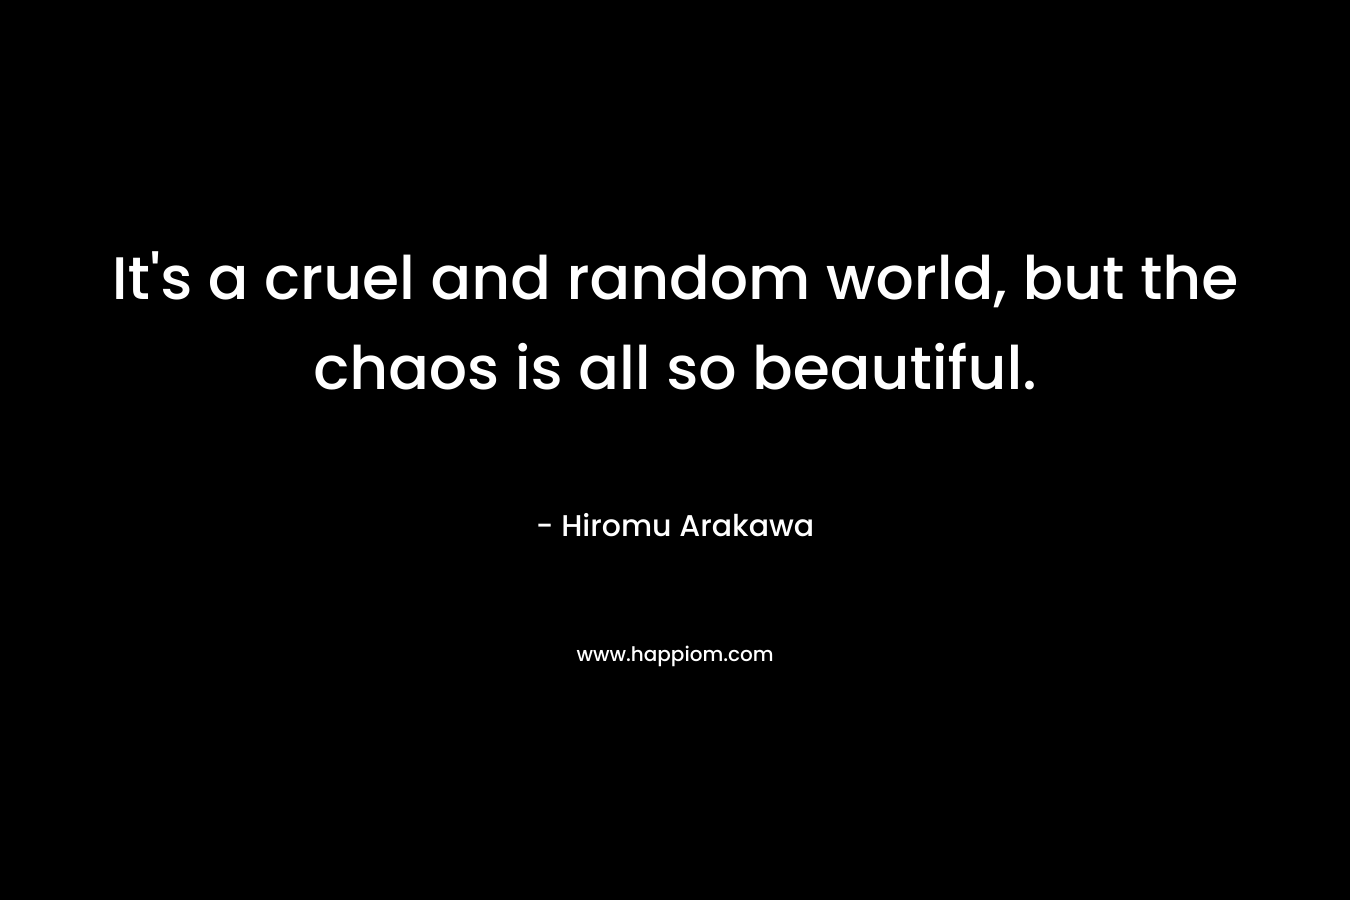 It's a cruel and random world, but the chaos is all so beautiful.